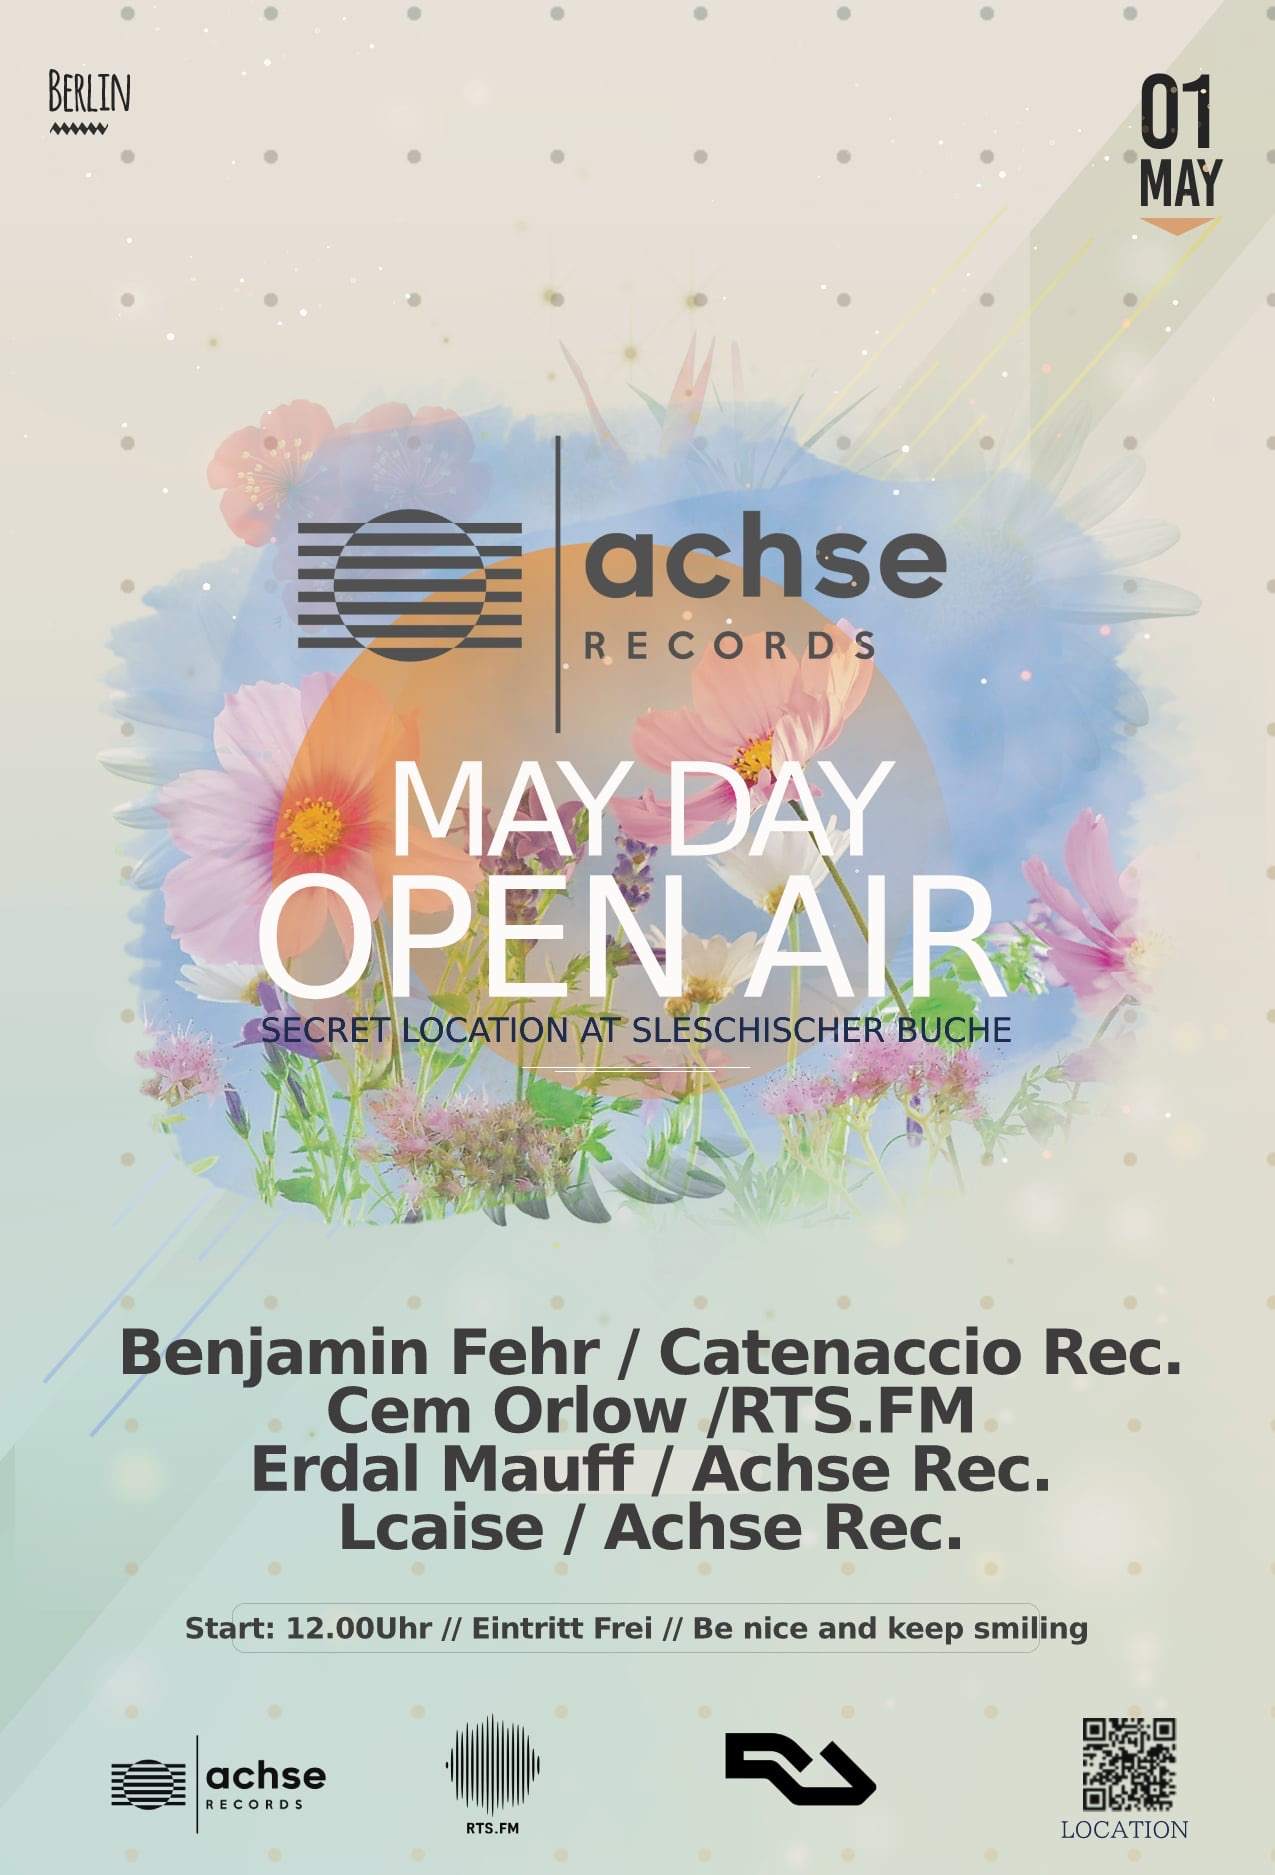 Cancelled: Achse Records May Day Open Air - フライヤー表